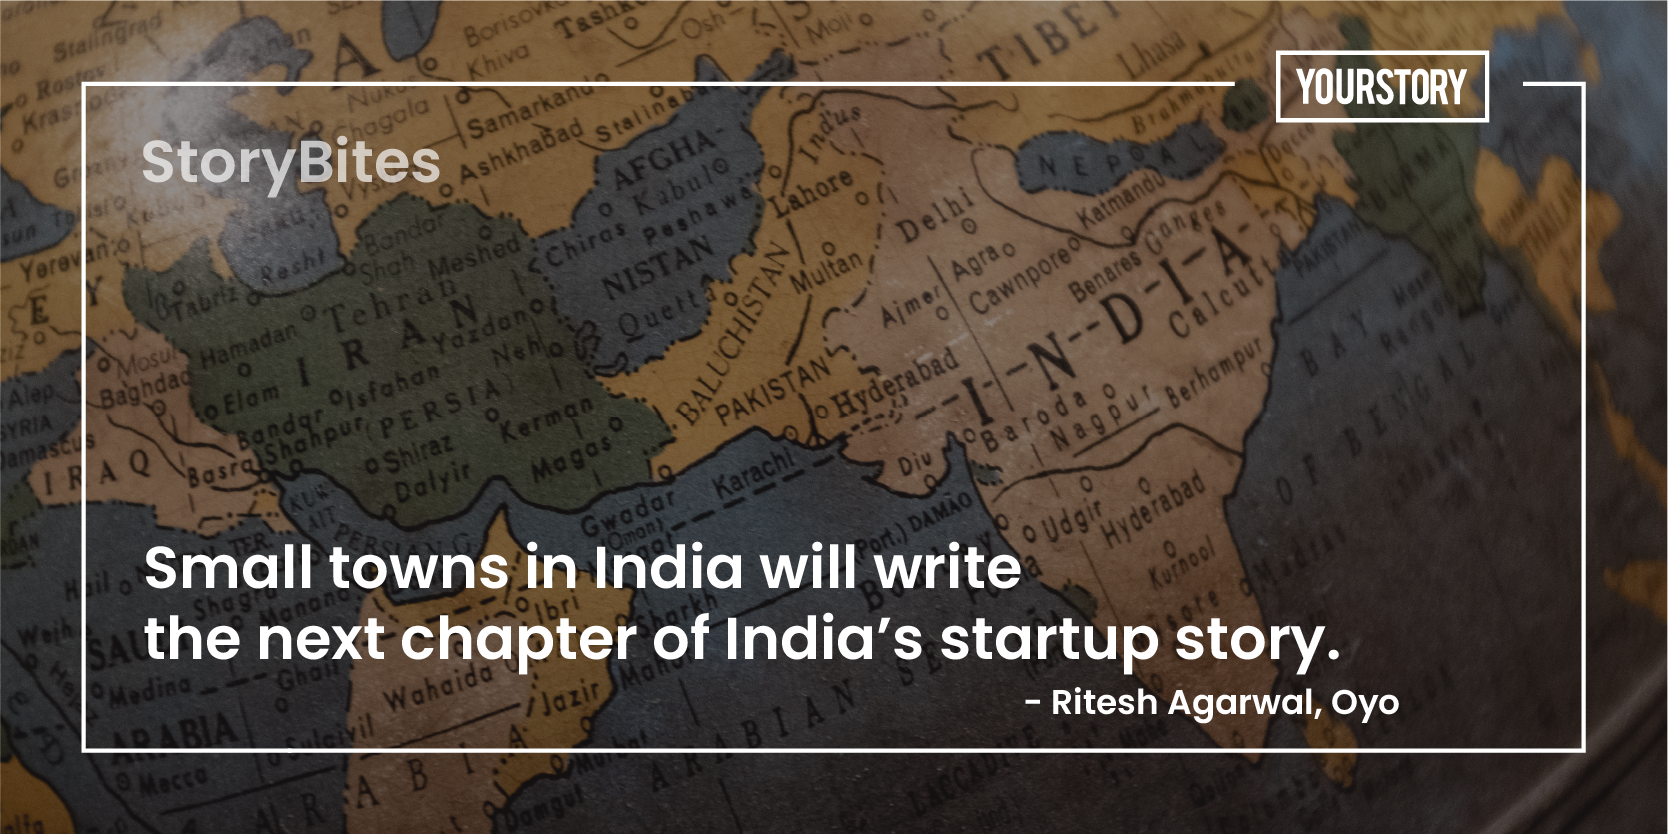 ‘Small towns in India will write the next chapter of India’s startup story’ – 20 quotes on the India business opportunity